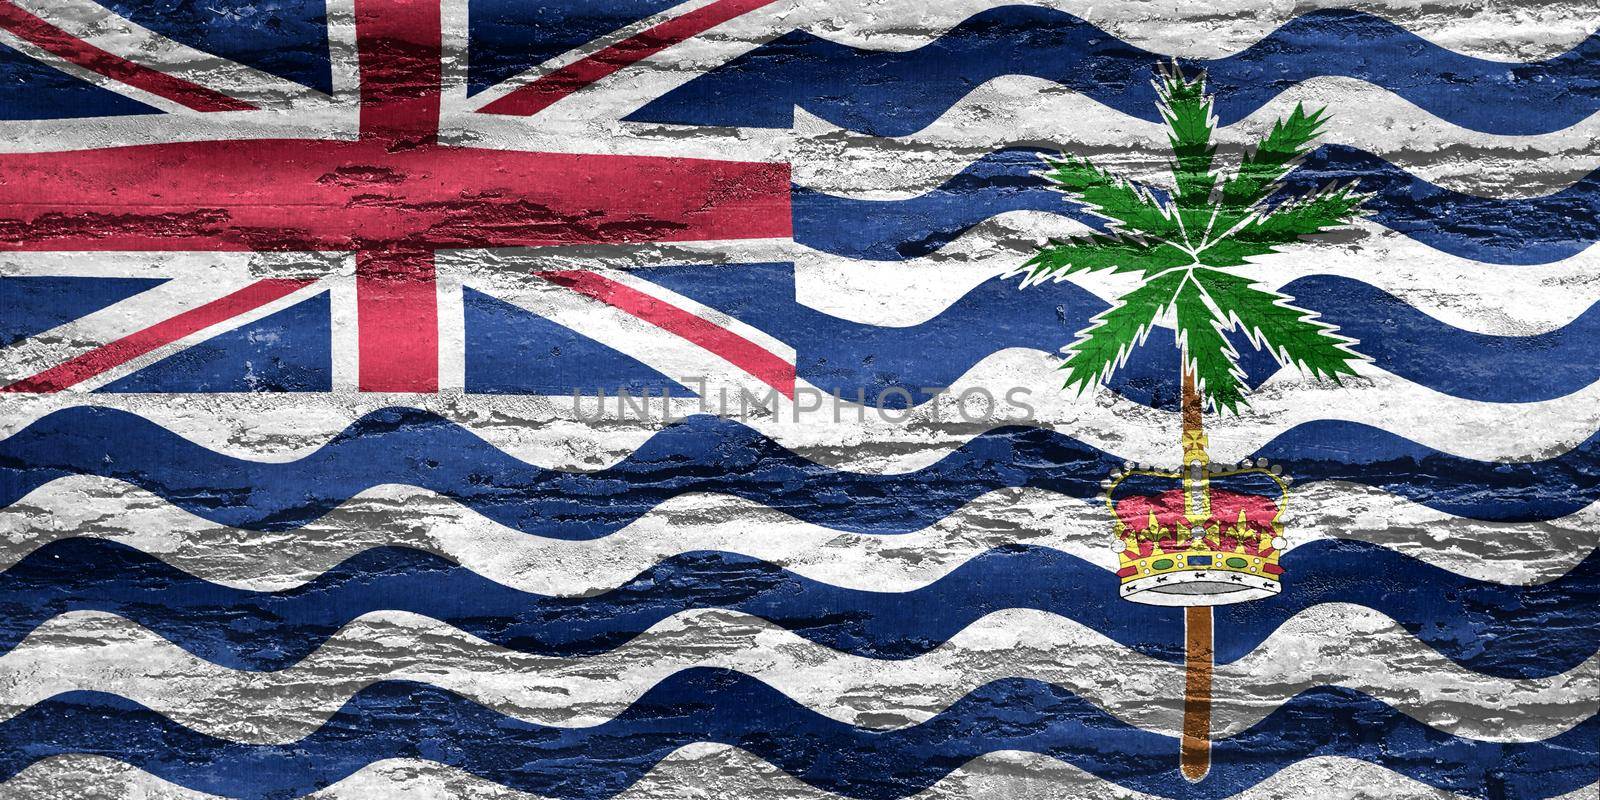 3D-Illustration of a British Indian Ocean Territory flag - realistic waving fabric flag by MP_foto71